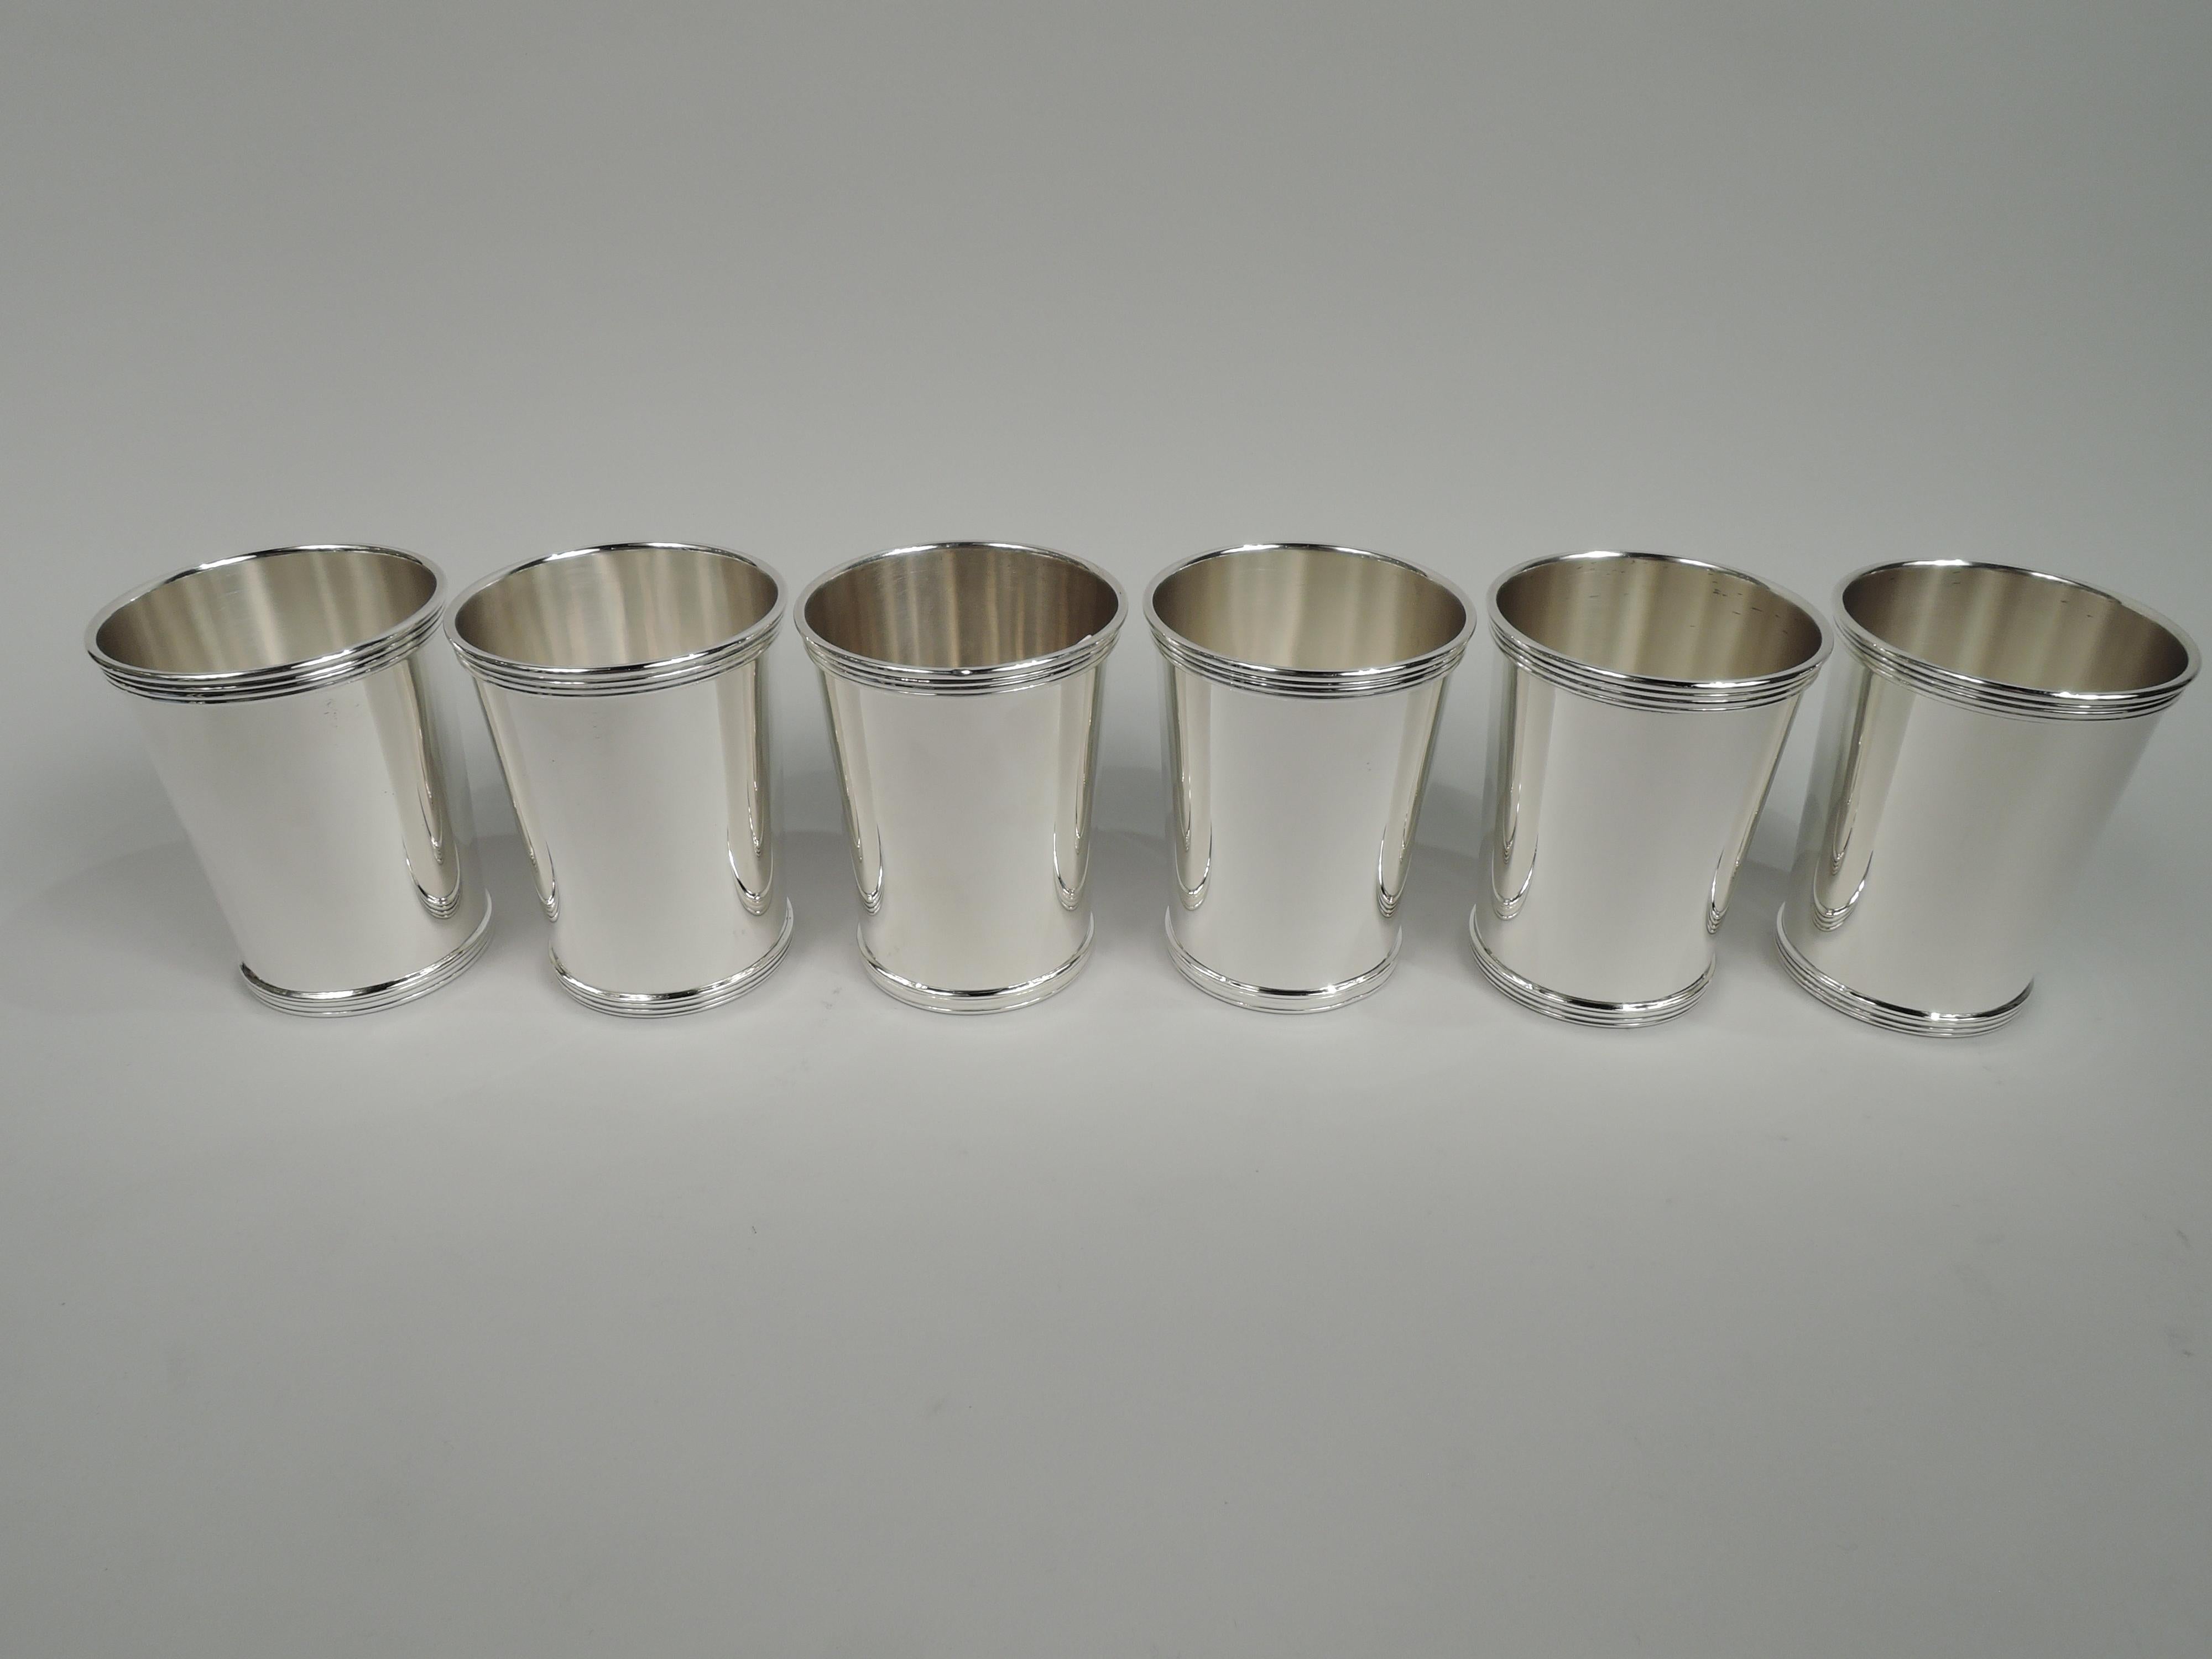 Set of 6 sterling silver mint julep cups. Made by International Silver Co. in Meriden, Conn. Each: Straight and tapering sides, and reeded rim and base. Fully marked including maker’s stamp and no. 10125/1. Total weight: 23.5 troy ounces.